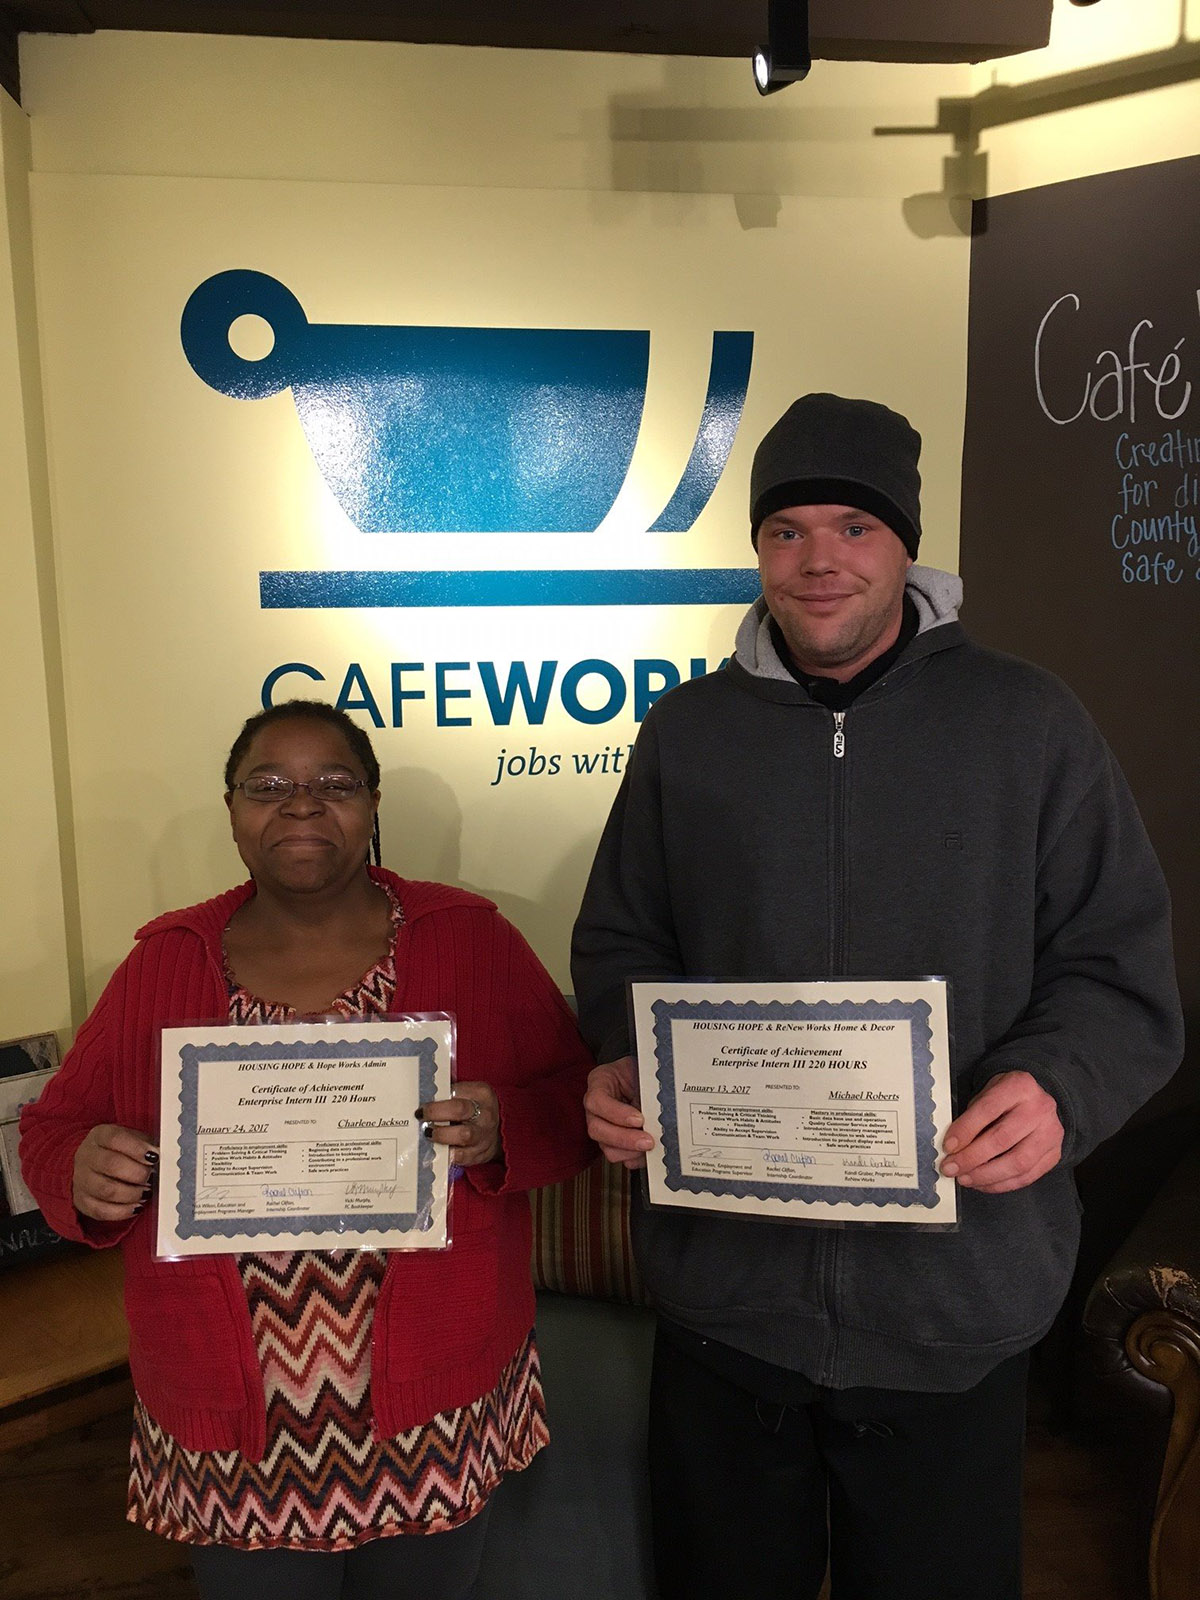 Photo of a man and a woman smiling at the camera, holding graduation certificates, with CafeWorks signage behind them.